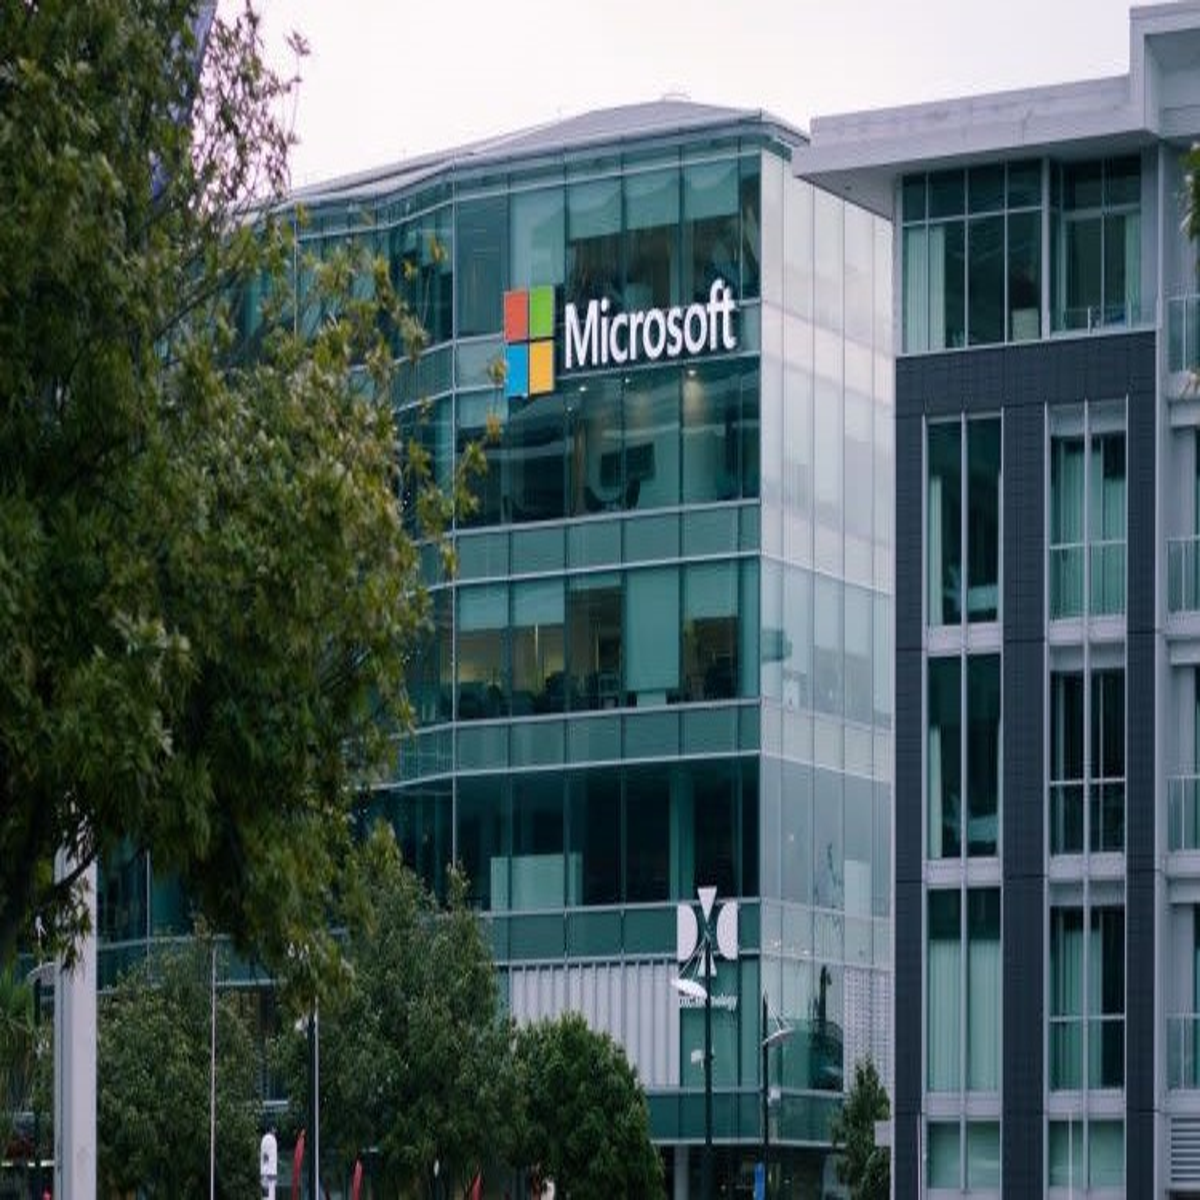 Microsoft would buy Valve 'if opportunity arises,' said Phil